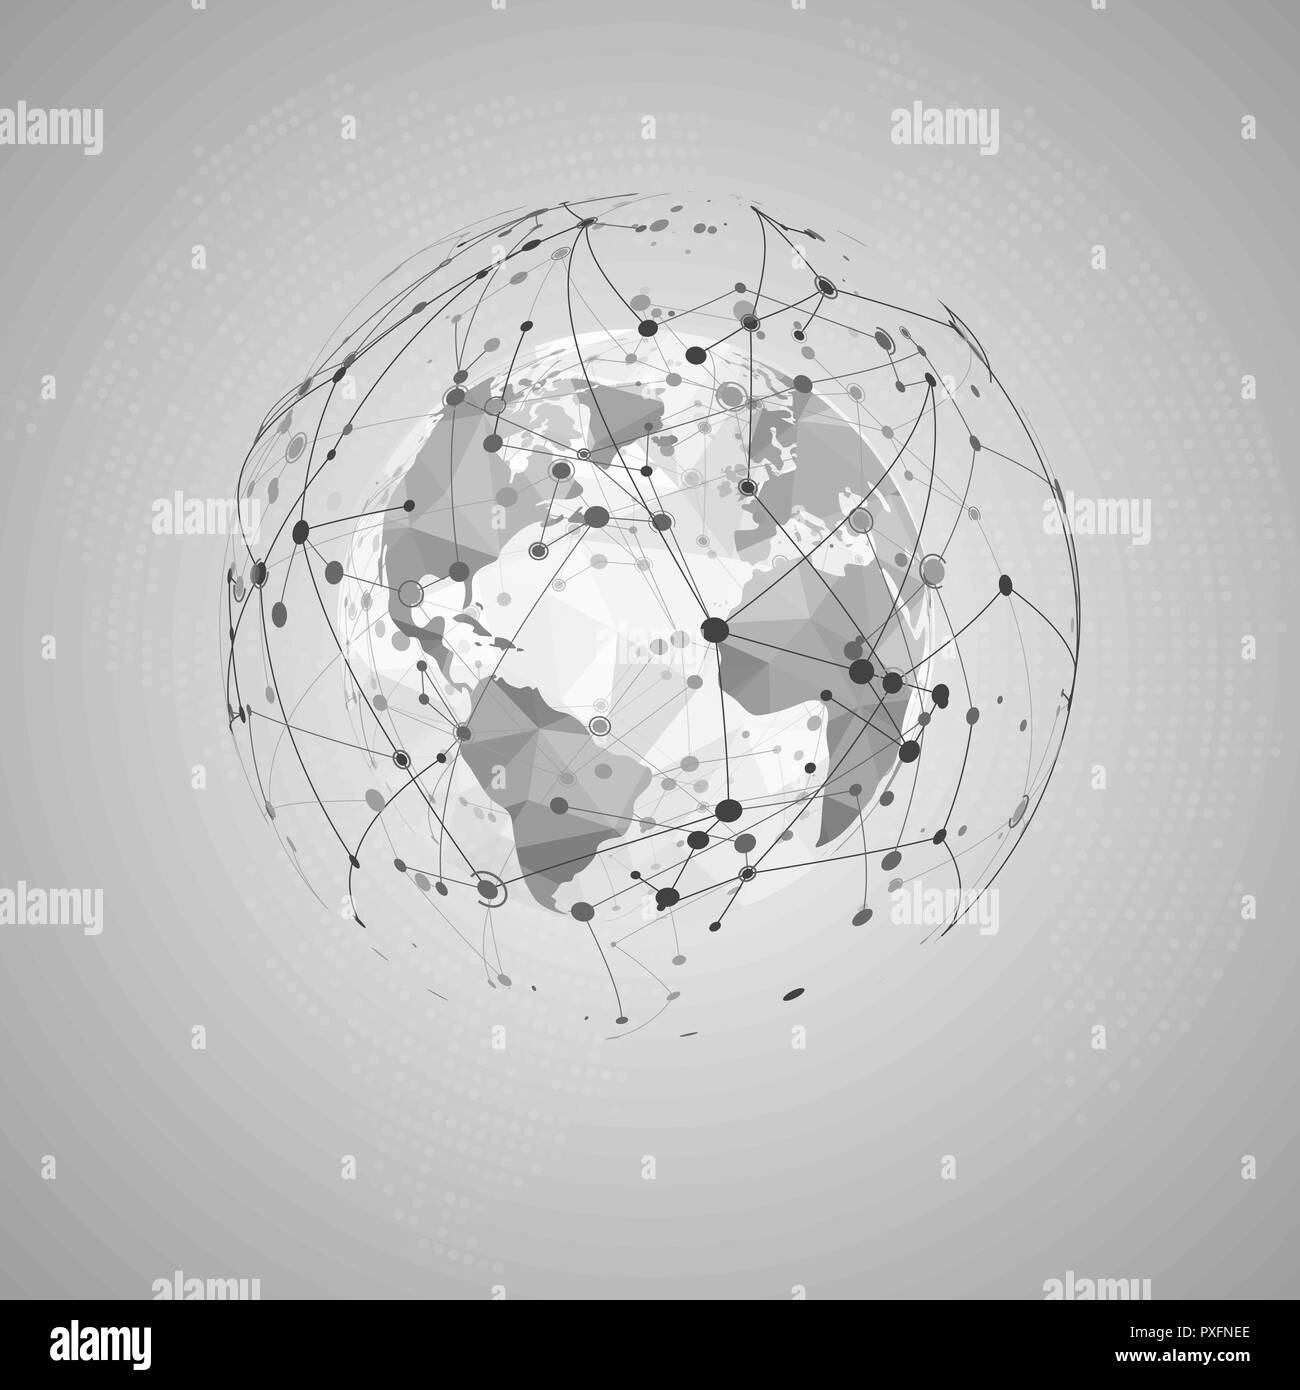 Abstract Internet Concept. World Polygonal Map and Visualization Plexus Network Structure. Vector illustration Stock Vector